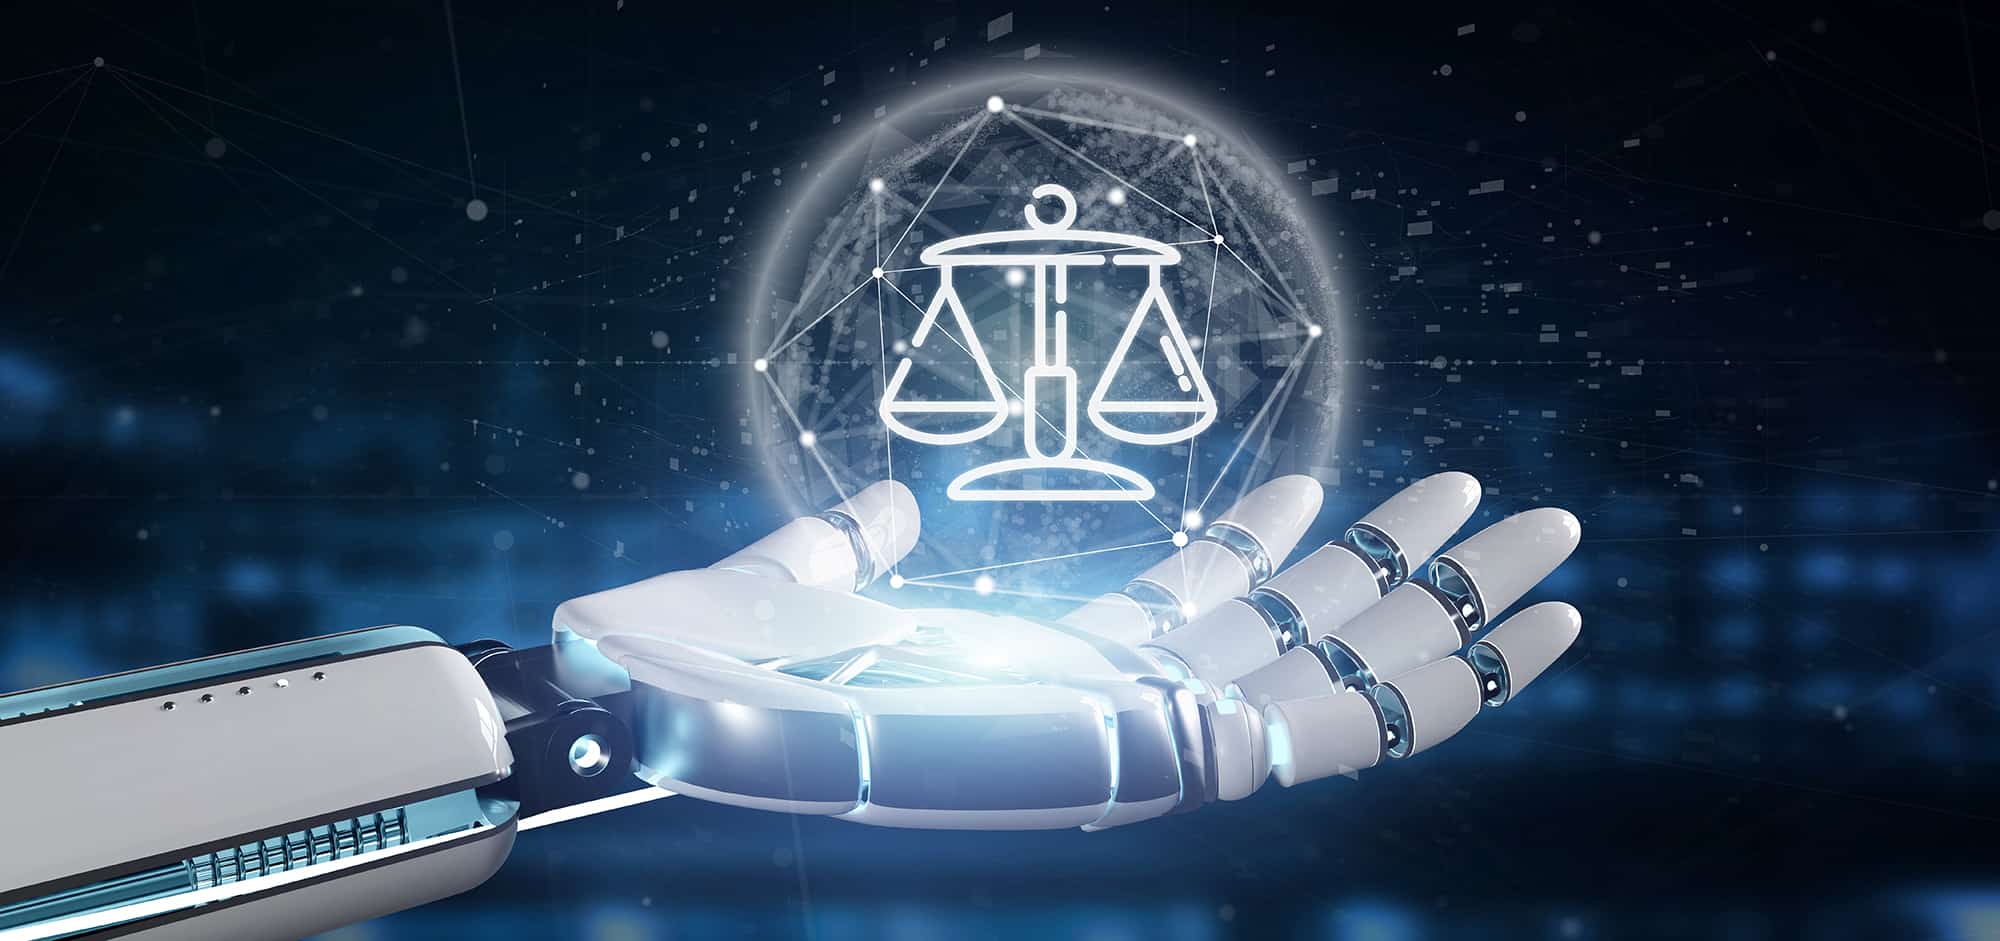 Judges remain skeptical on whether artificial intelligence